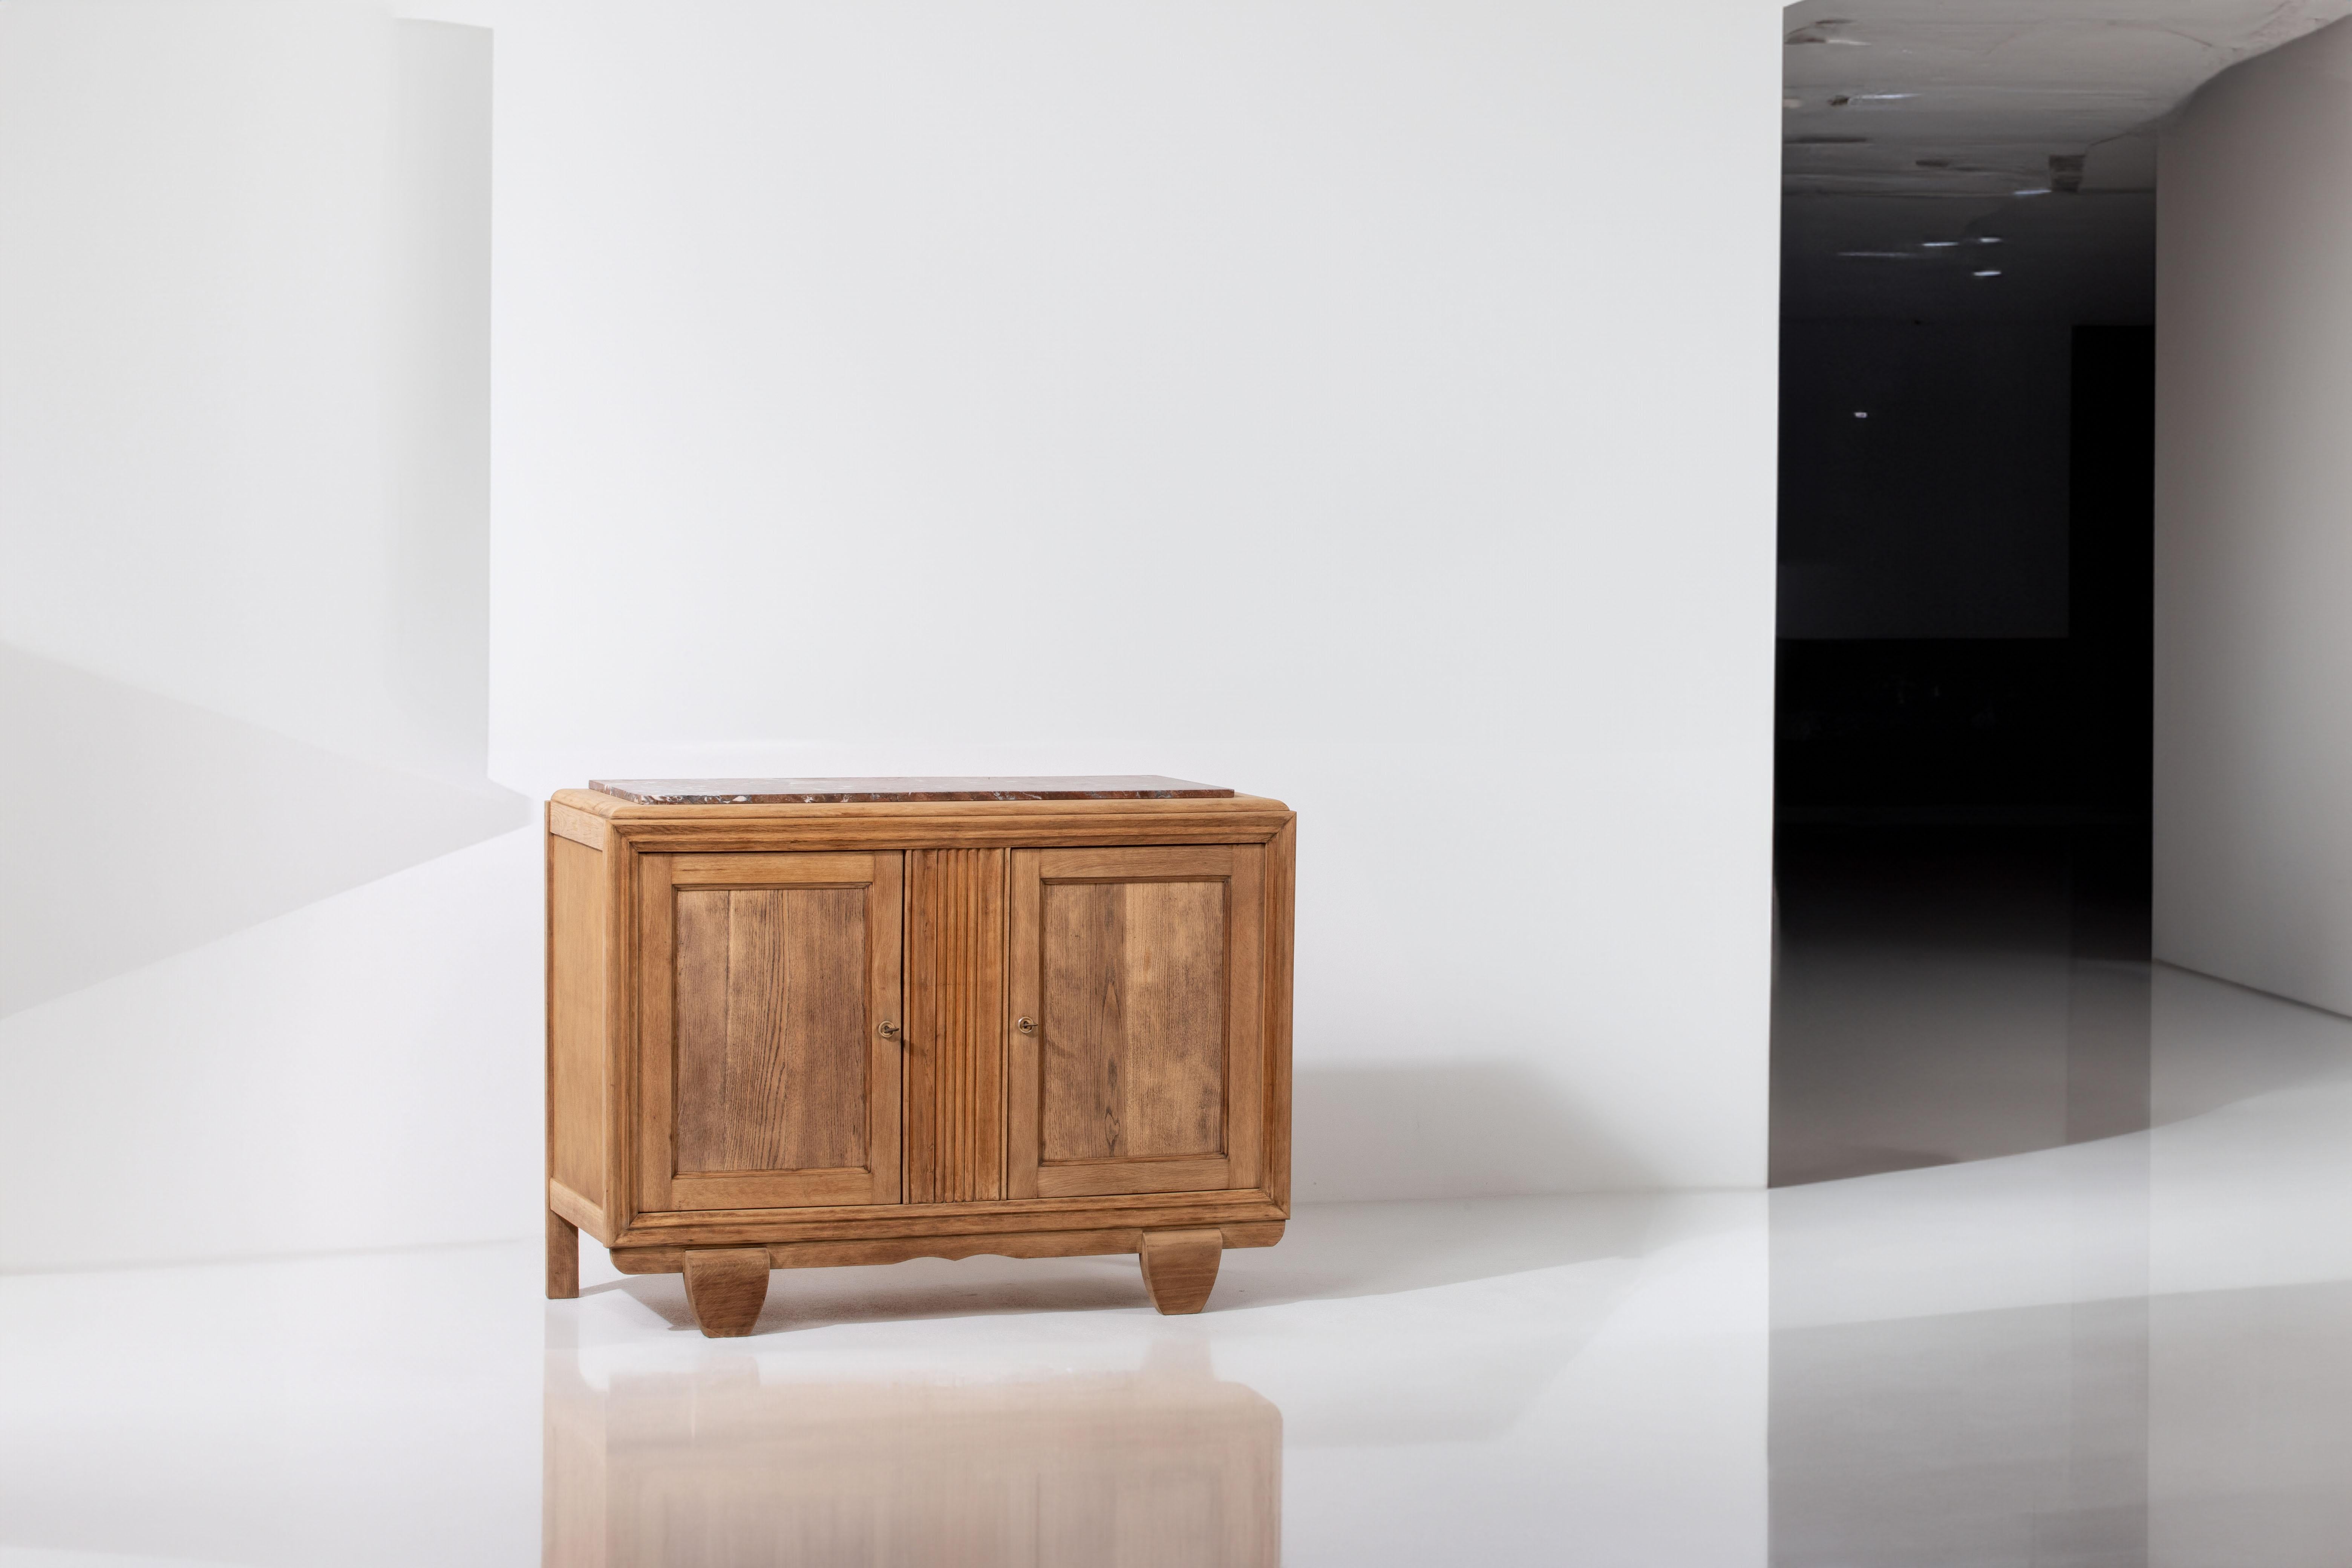 Immerse yourself in the timeless elegance of this compact oak credenza from the  40s. Crafted with meticulous attention to detail in 1940s France, this credenza captures the essence of Art Deco sophistication, reflecting an era characterized by